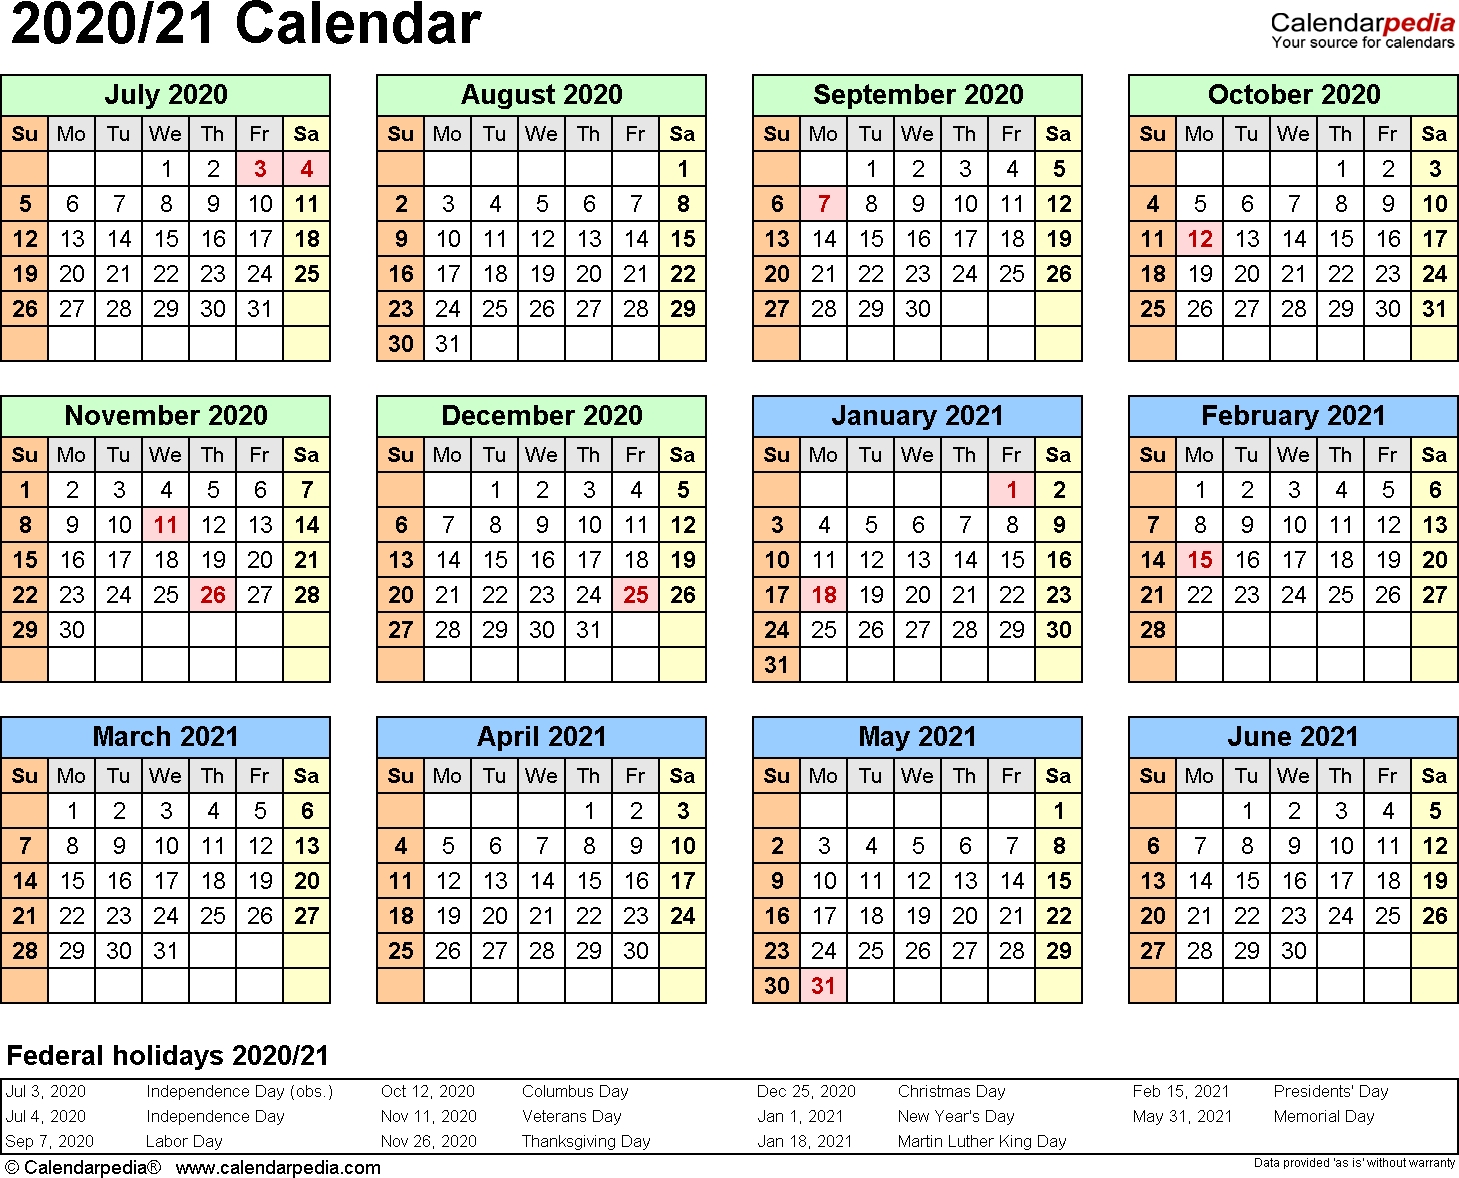 Split Year Calendars 2020/2021 (July To June) - Word Templates Incredible Calendarpedia 2020 For South Africa